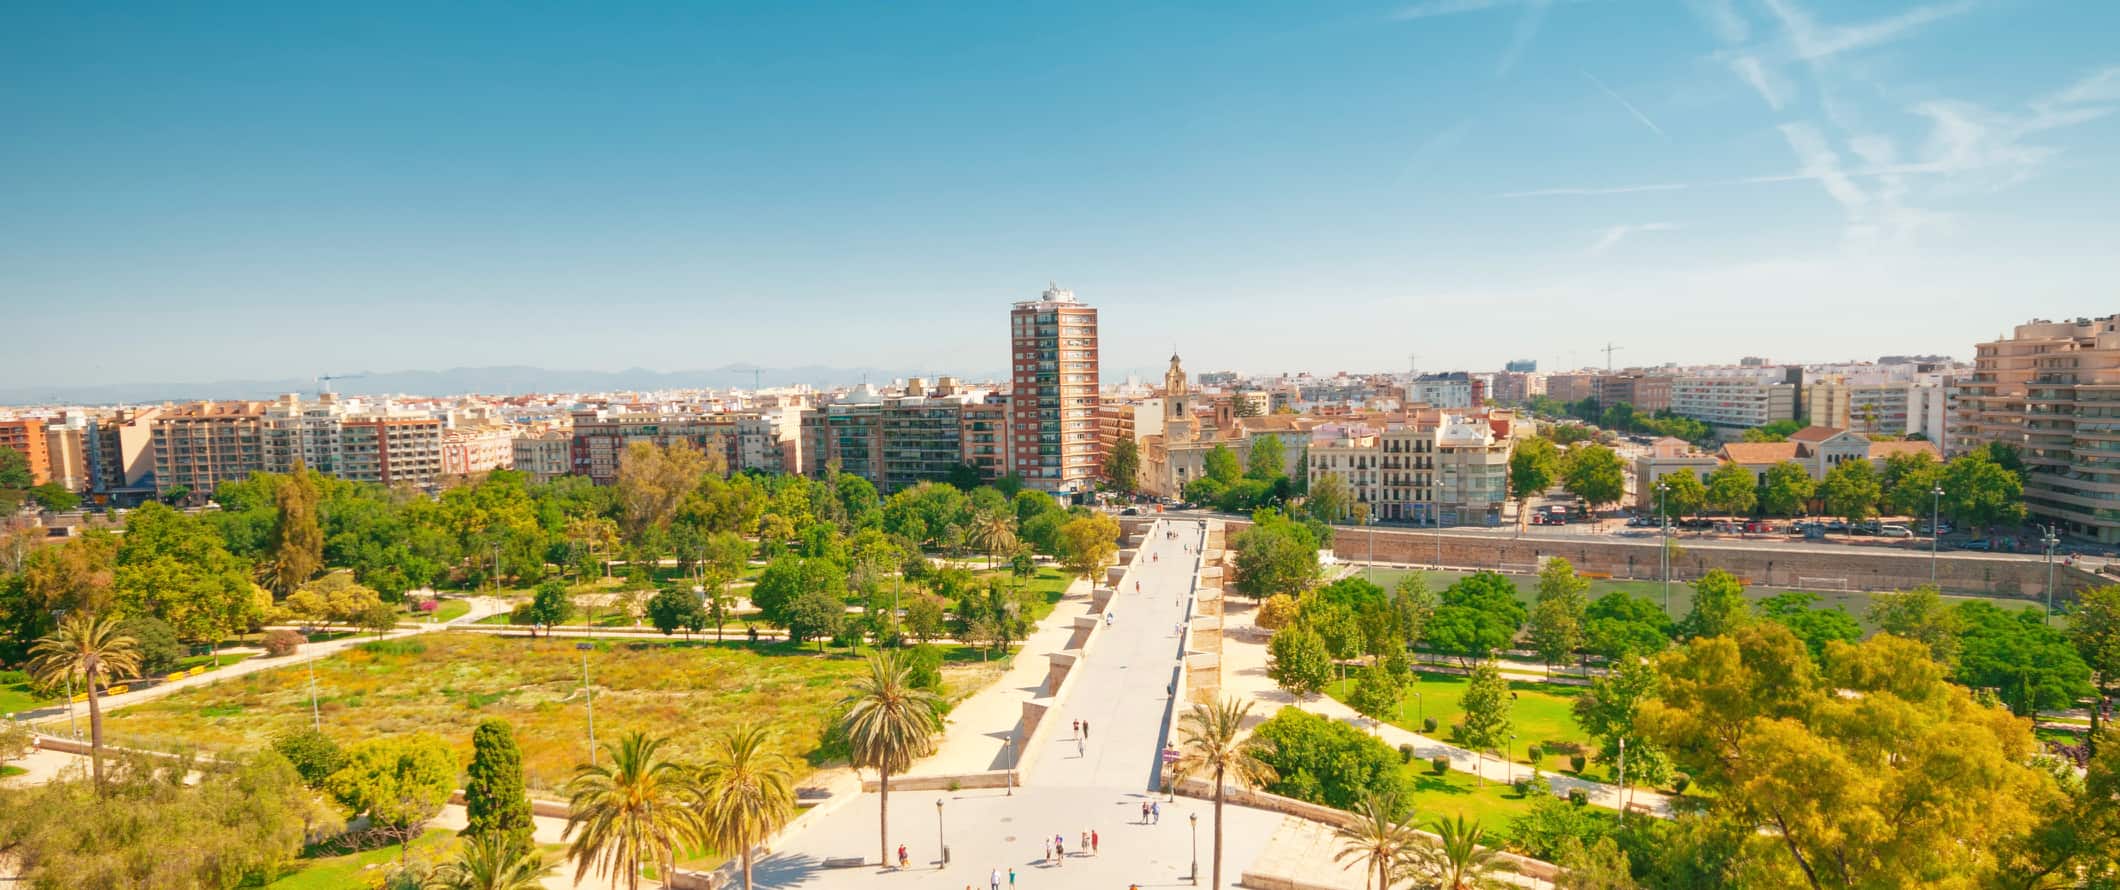 An aerial view overlooking the beautiful city of Valencia, Spain on a bright summer day